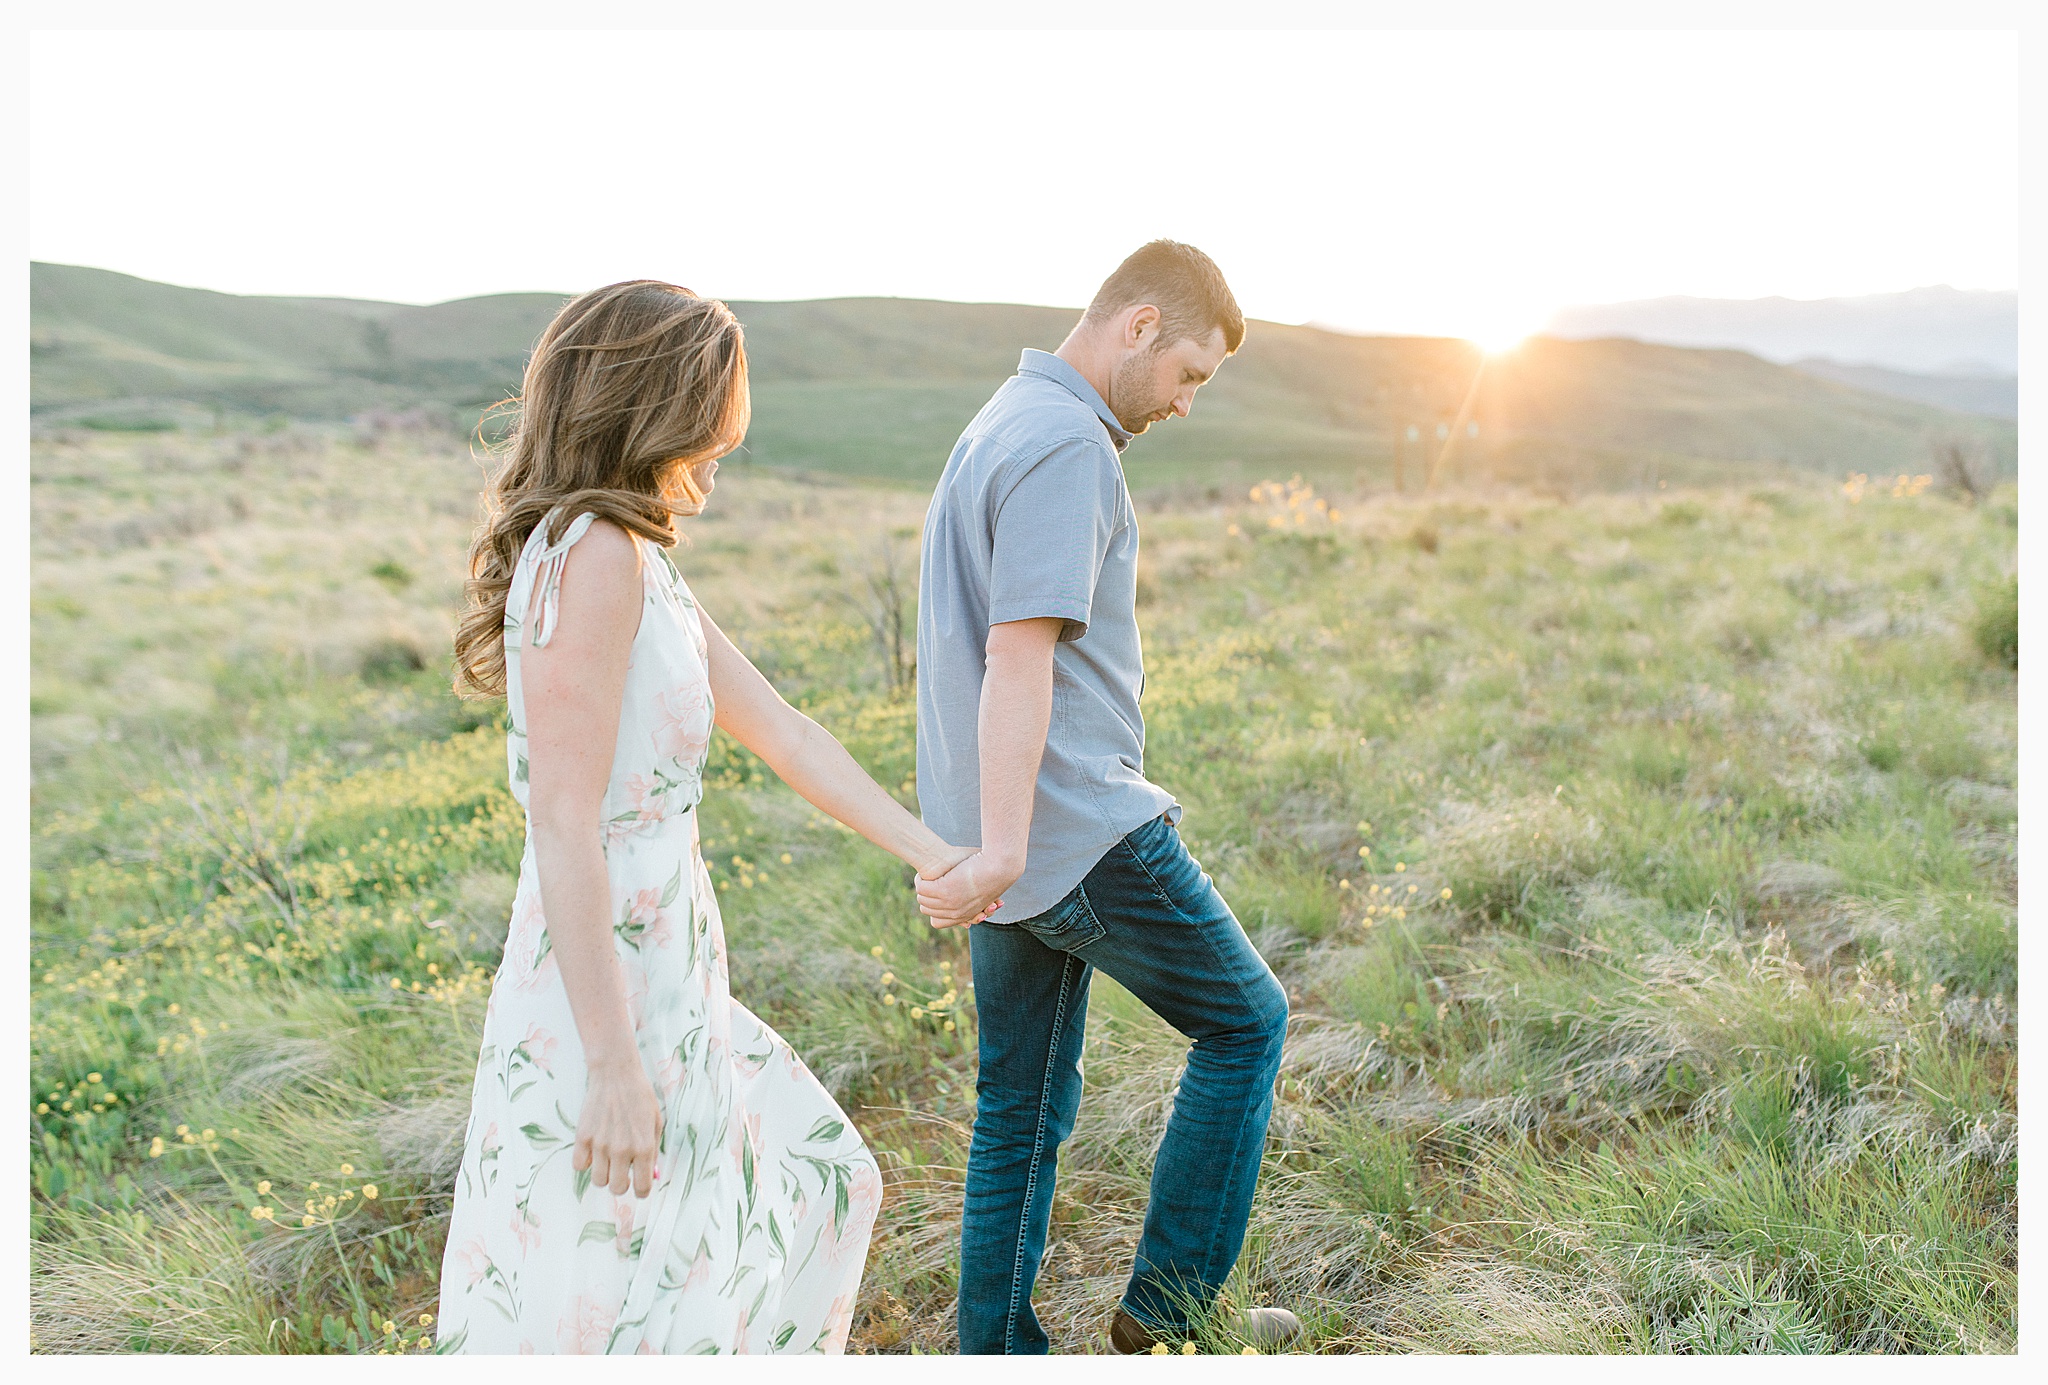 Engagement session amongst the wildflowers in Wenatchee, Washington | Engagement Session Outfit Inspiration for Wedding Photography with Emma Rose Company | Light and Airy PNW Photographer, Seattle Bride_0032.jpg